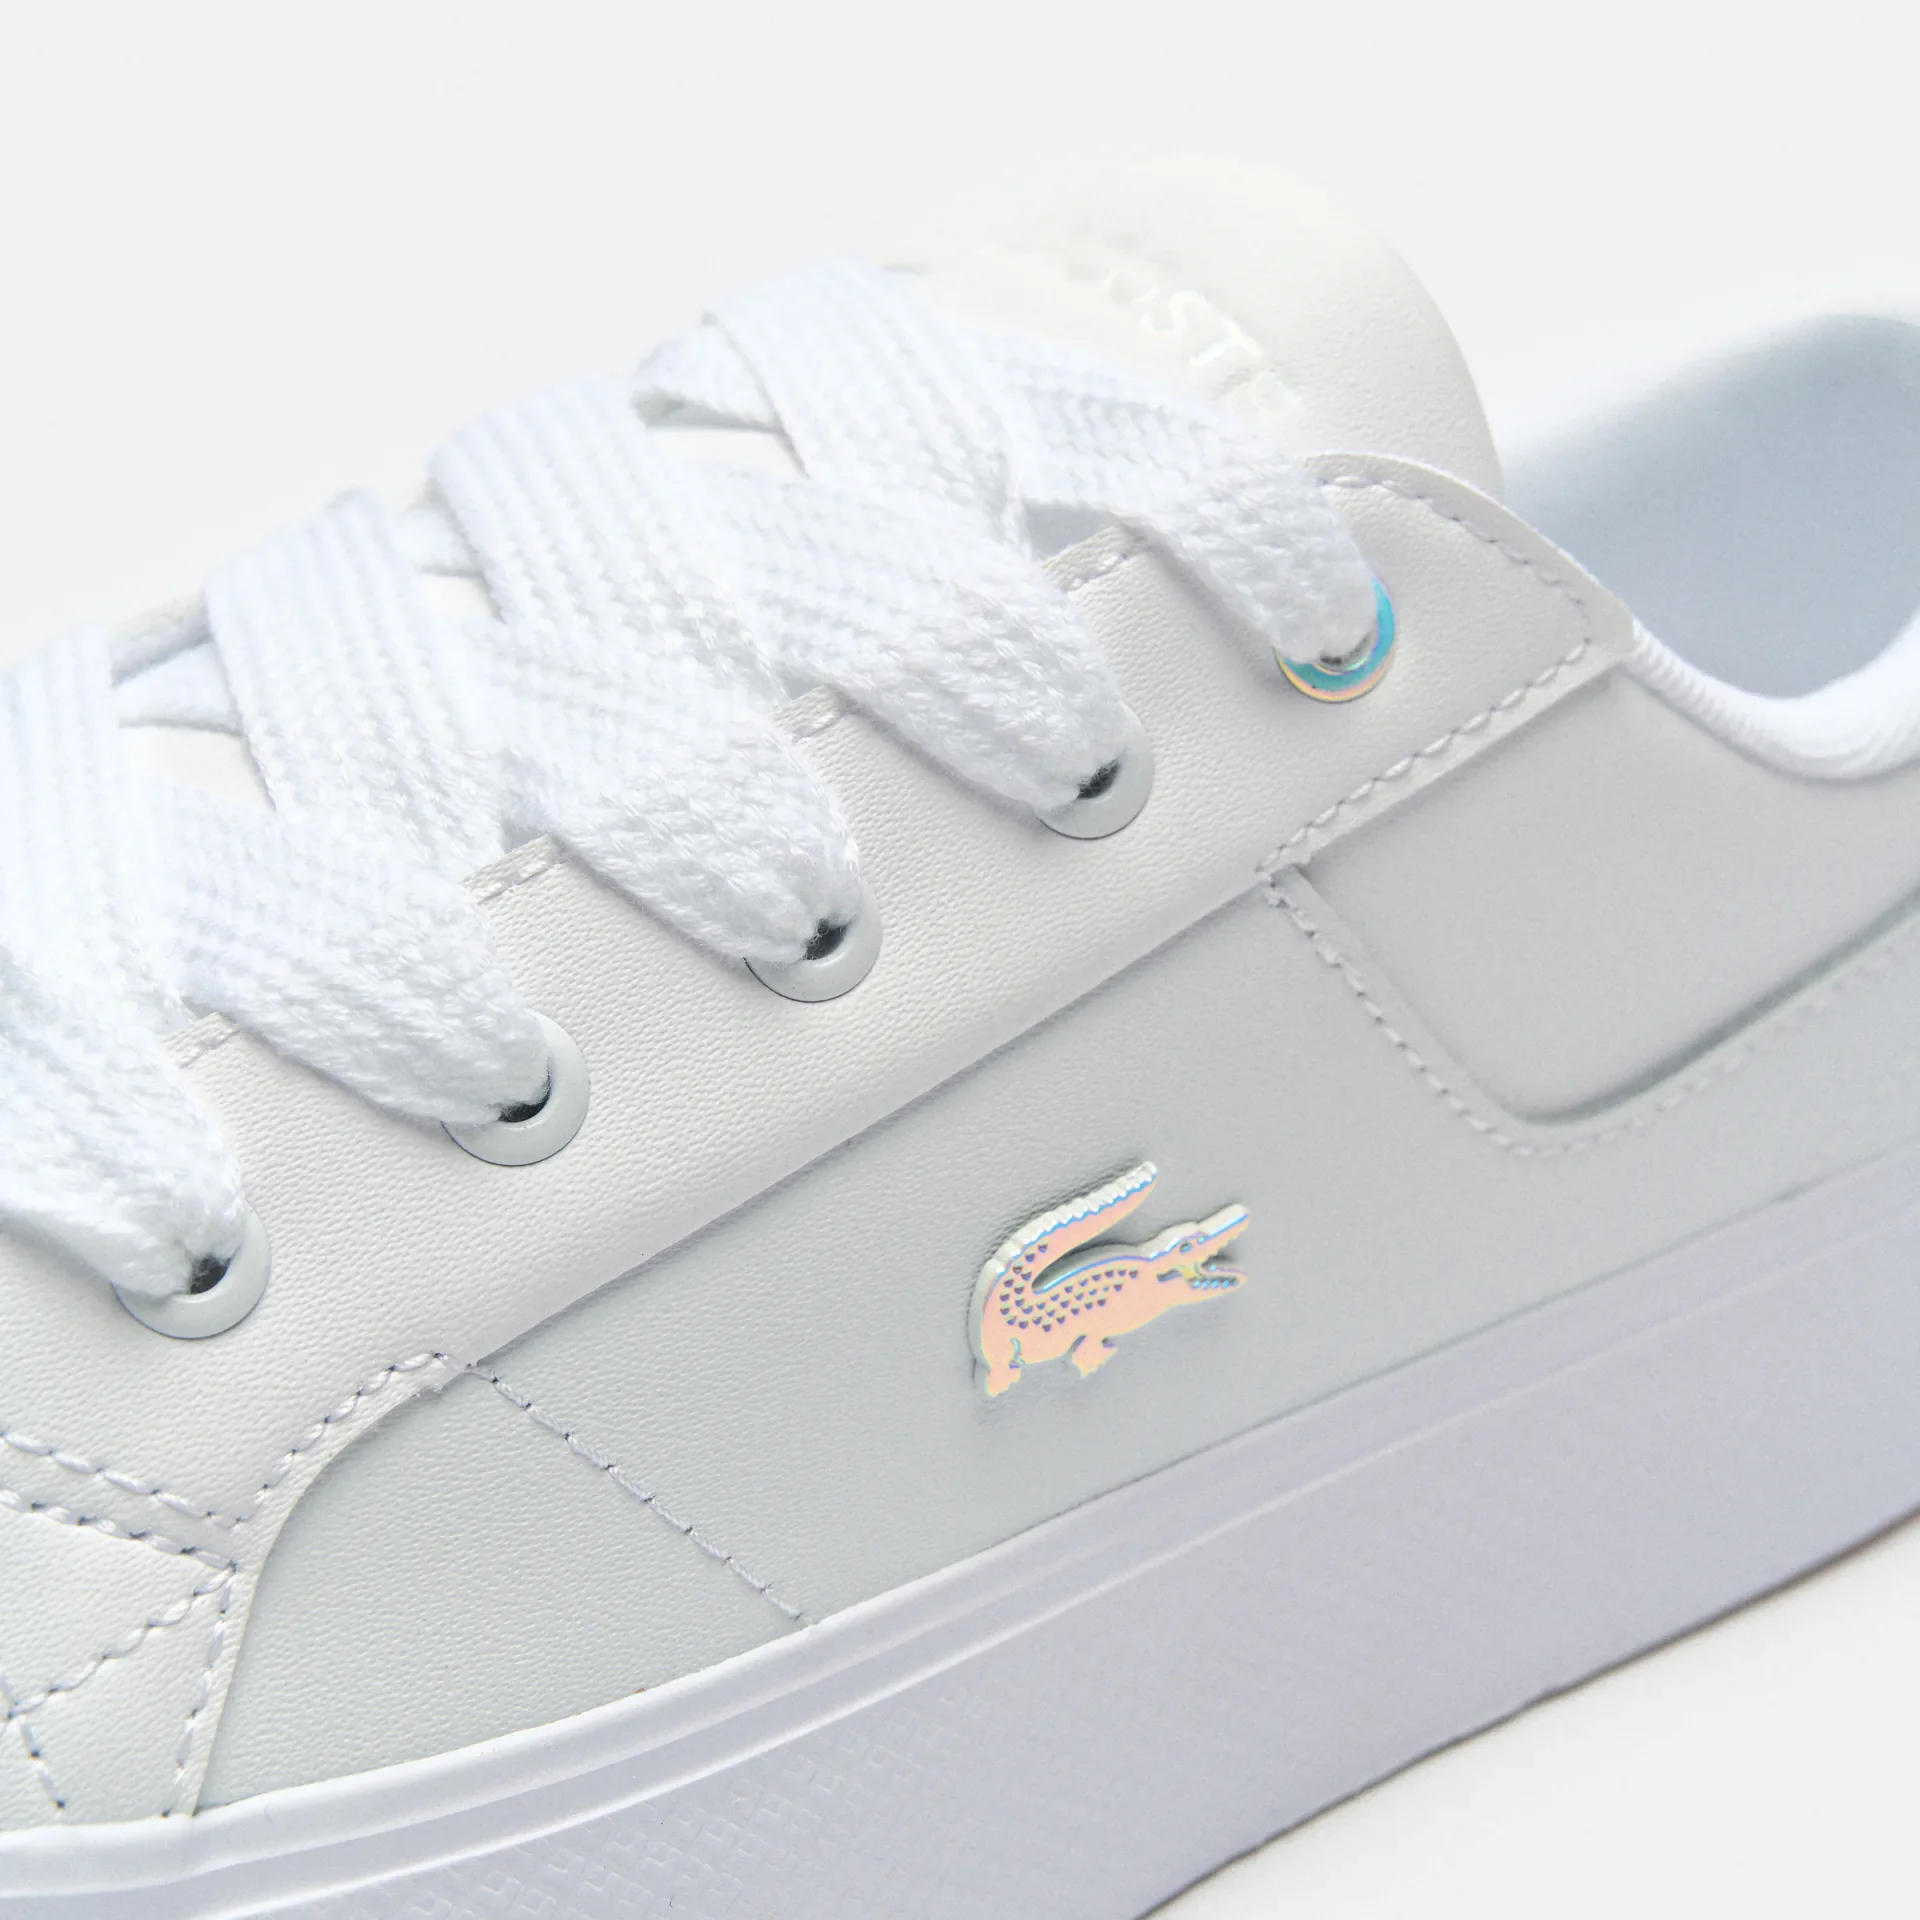 Lacoste Ziane Platform Leather Sneakers White/Light Pink